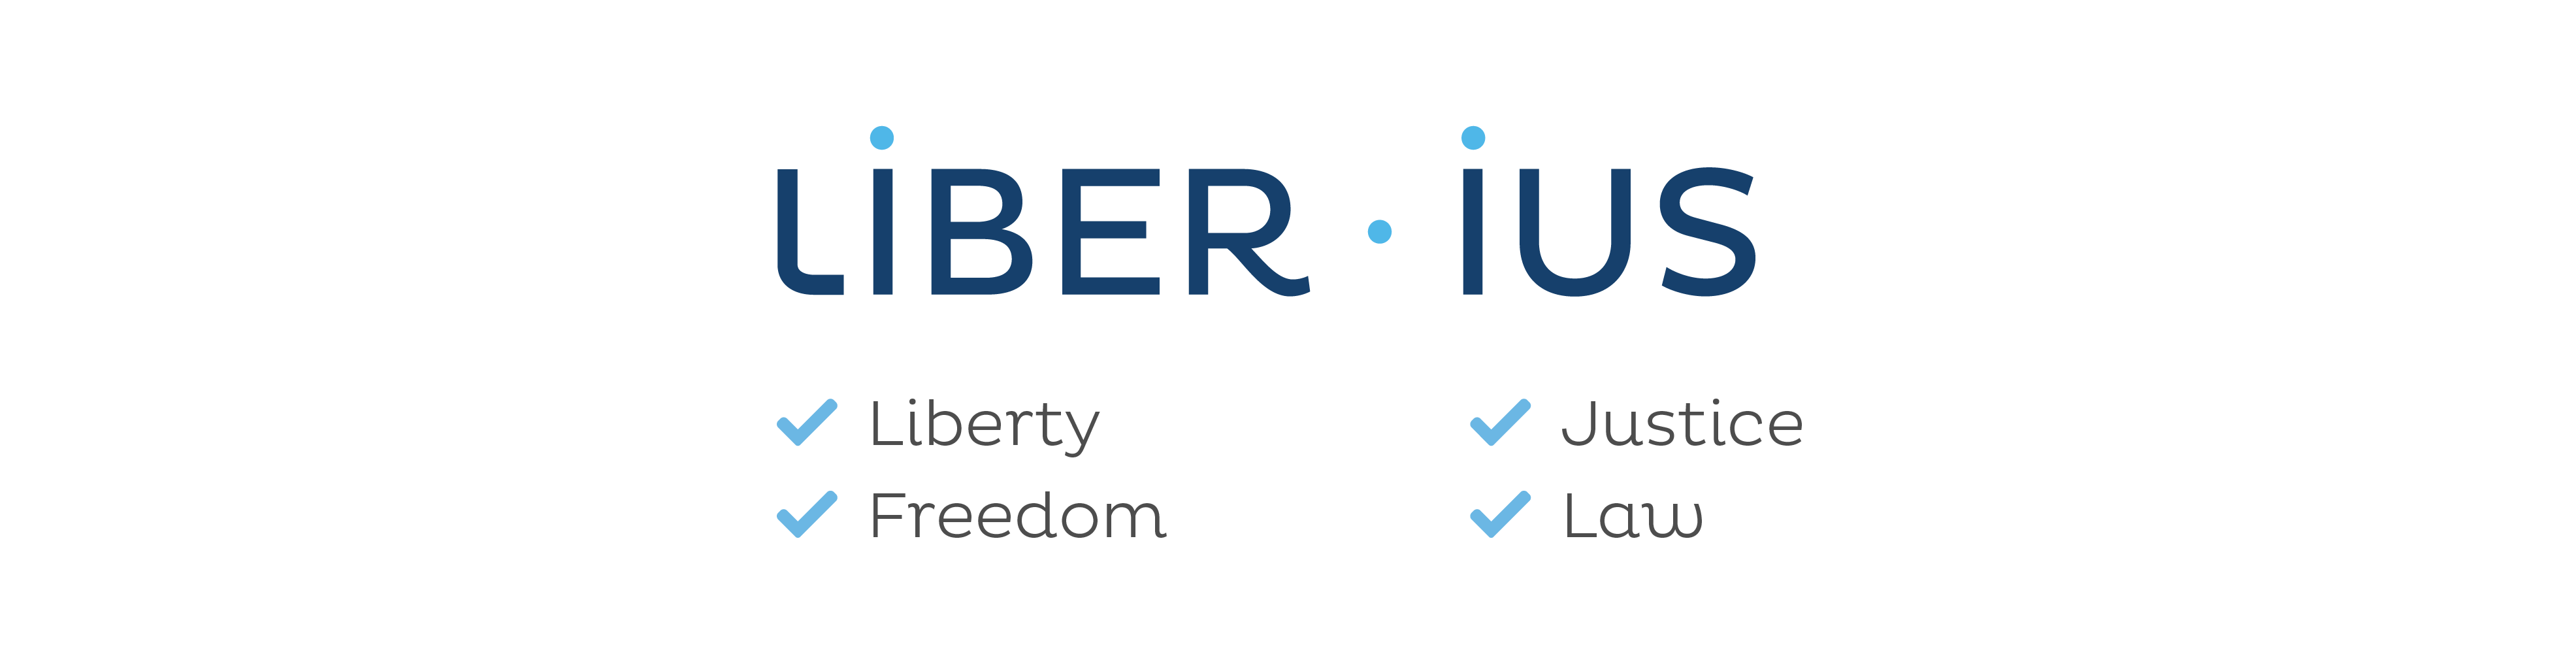 The liber.ius logo with a bulletlist beneath it with the values of the company displayed